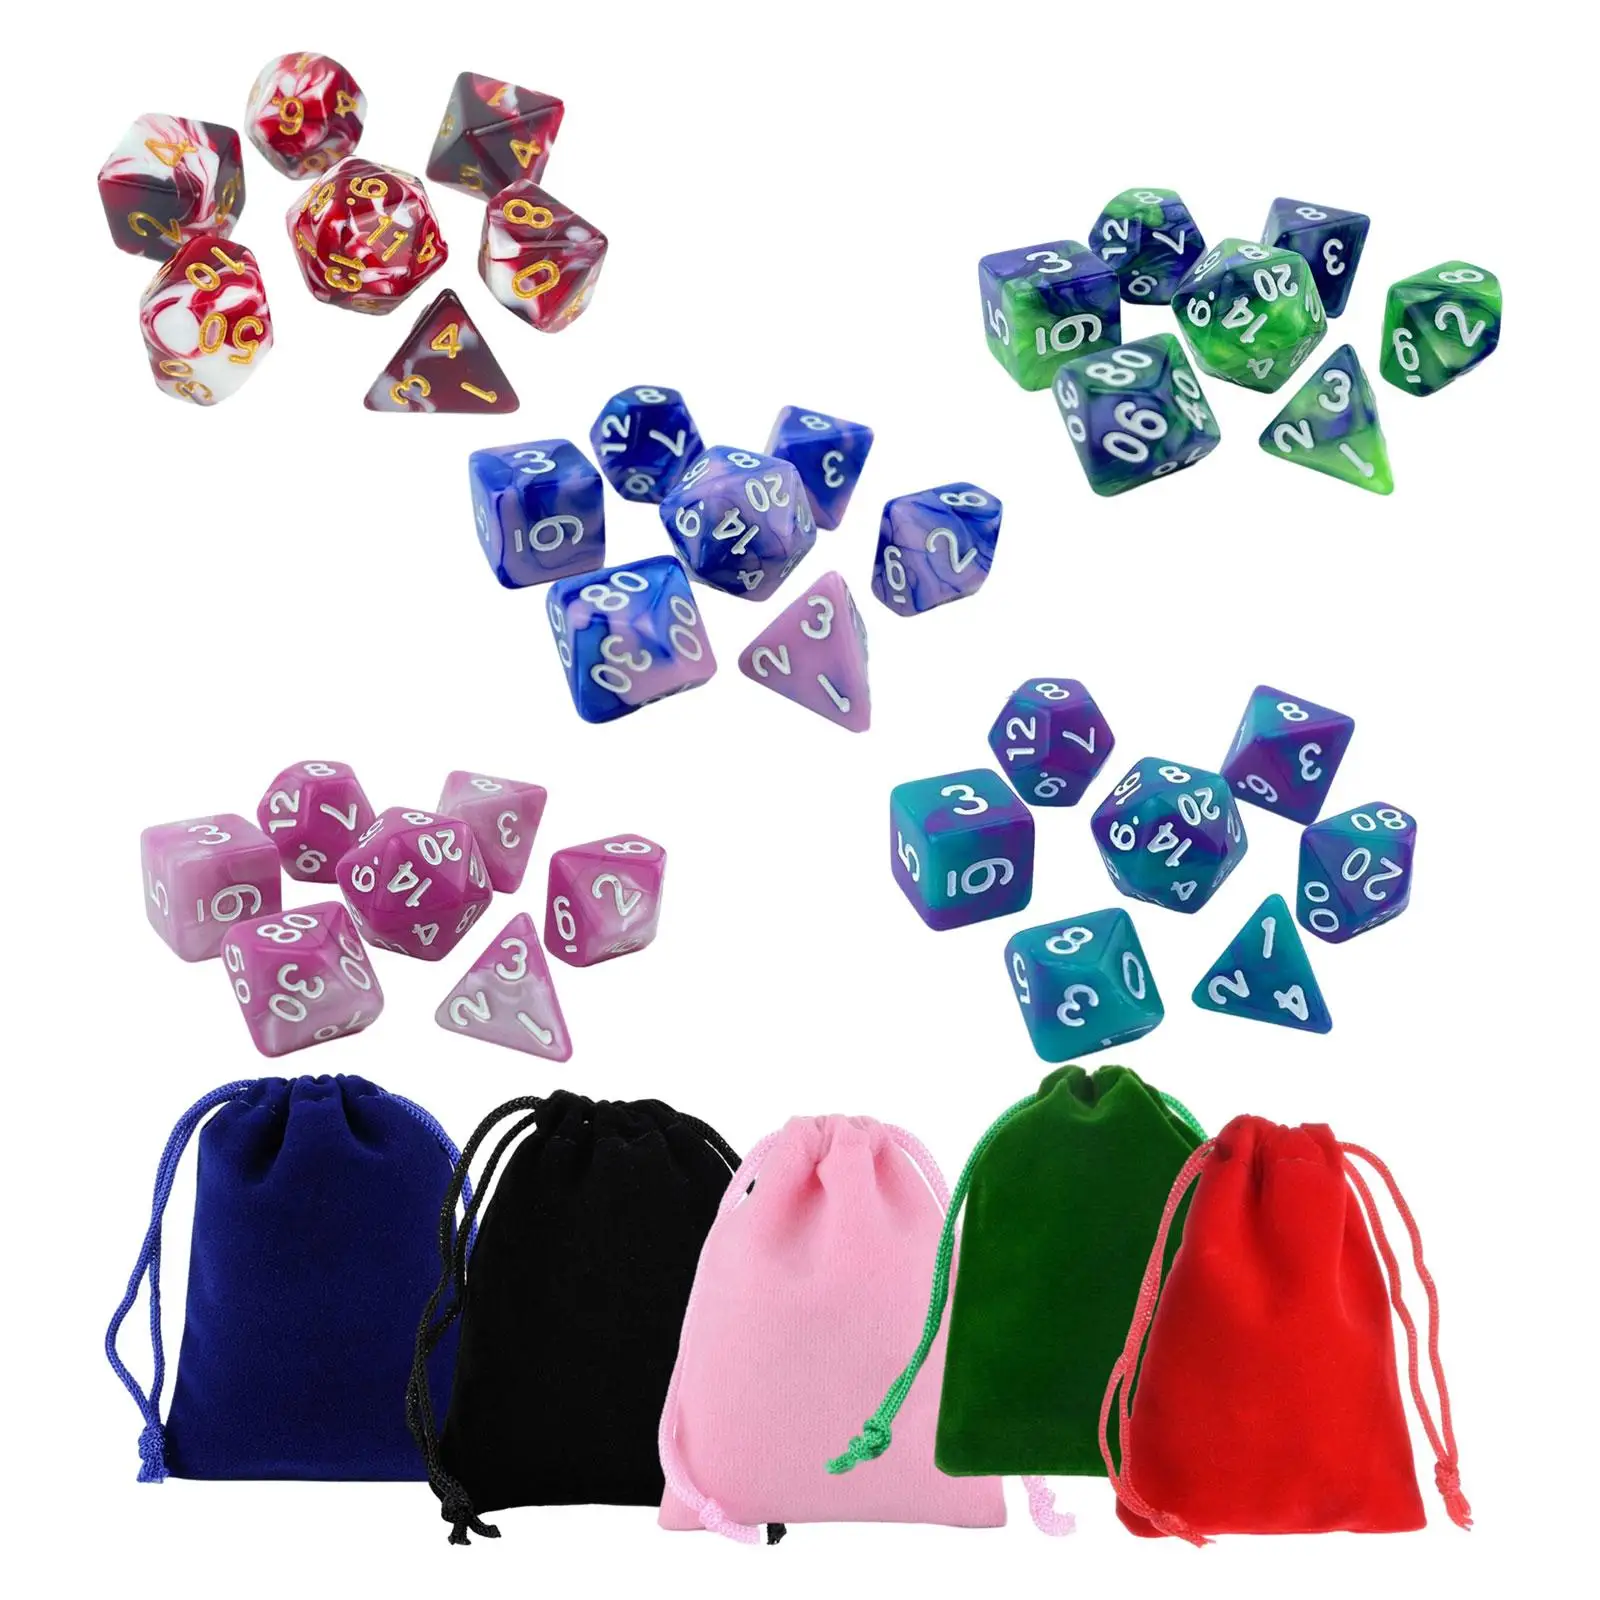 35 Pieces Polyhedral Dices Set with Drawstring Bags Family Games Accessaries Number Game Dice Games Set for Table Board Party